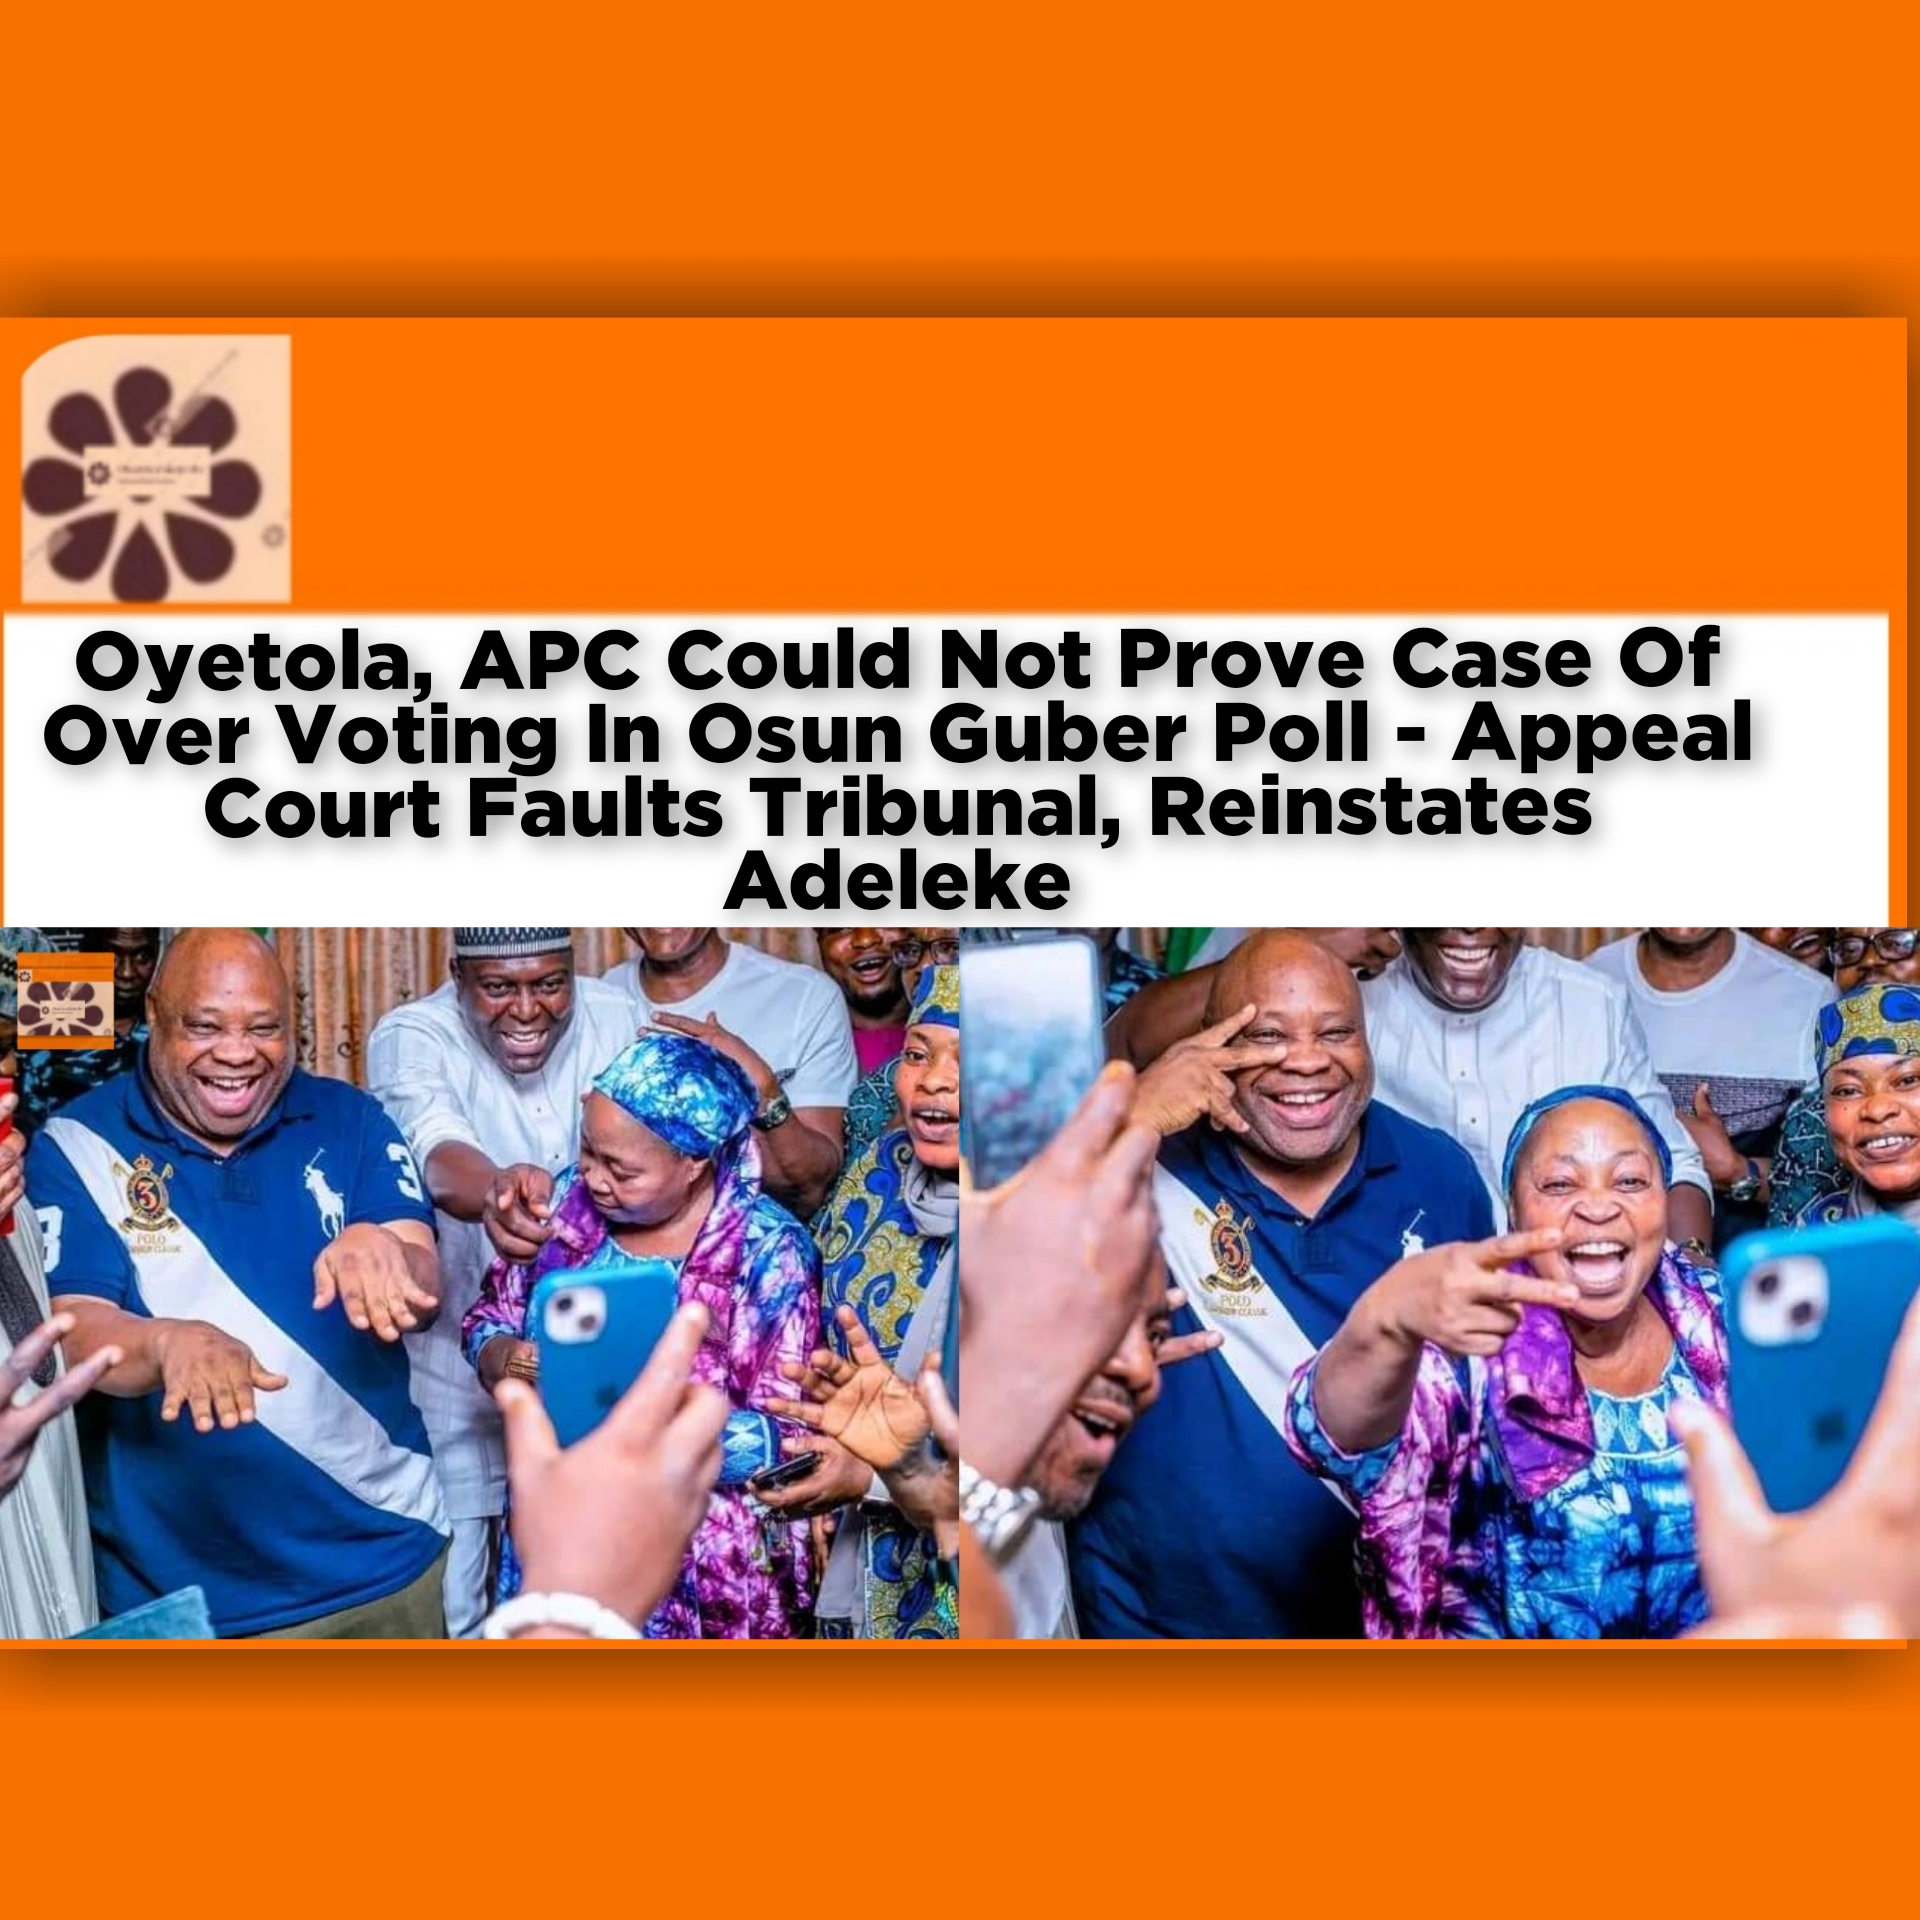 Oyetola, APC Could Not Prove Case Of Over Voting In Osun Guber Poll - Appeal Court Faults Tribunal, Reinstates Adeleke ~ OsazuwaAkonedo Life